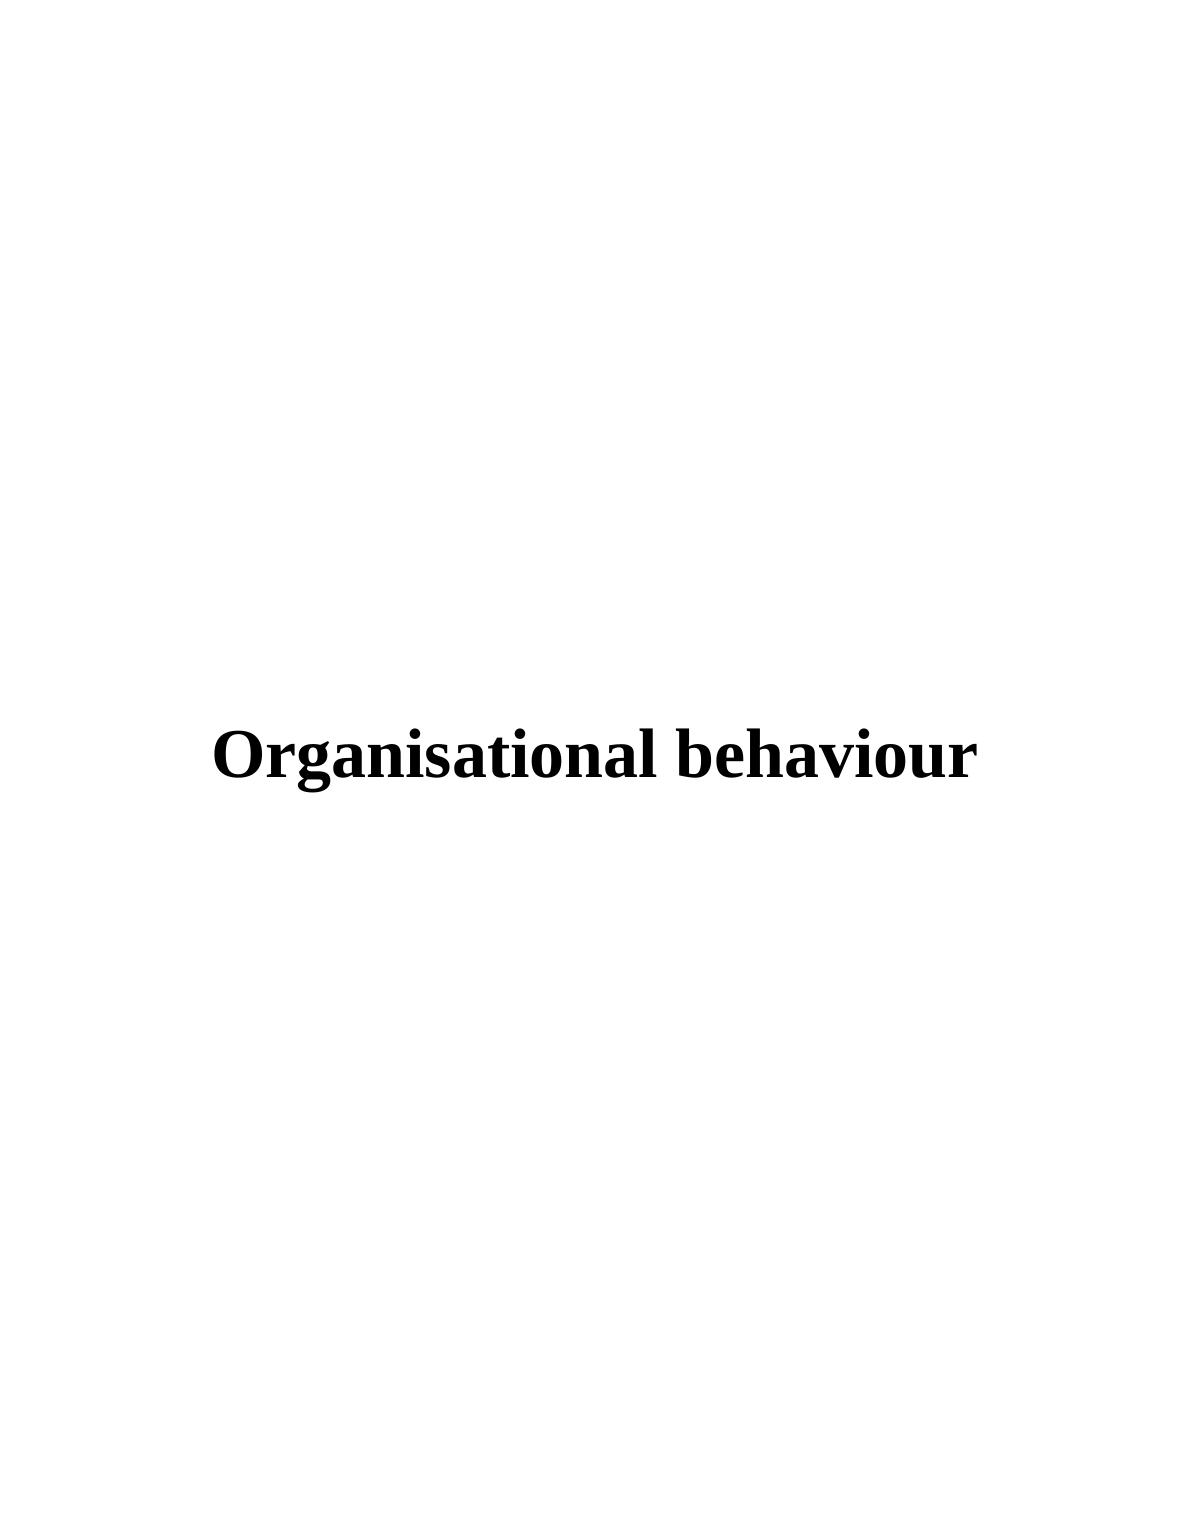 P4 Concepts and philosophies of organization behaviour (Doc)_1